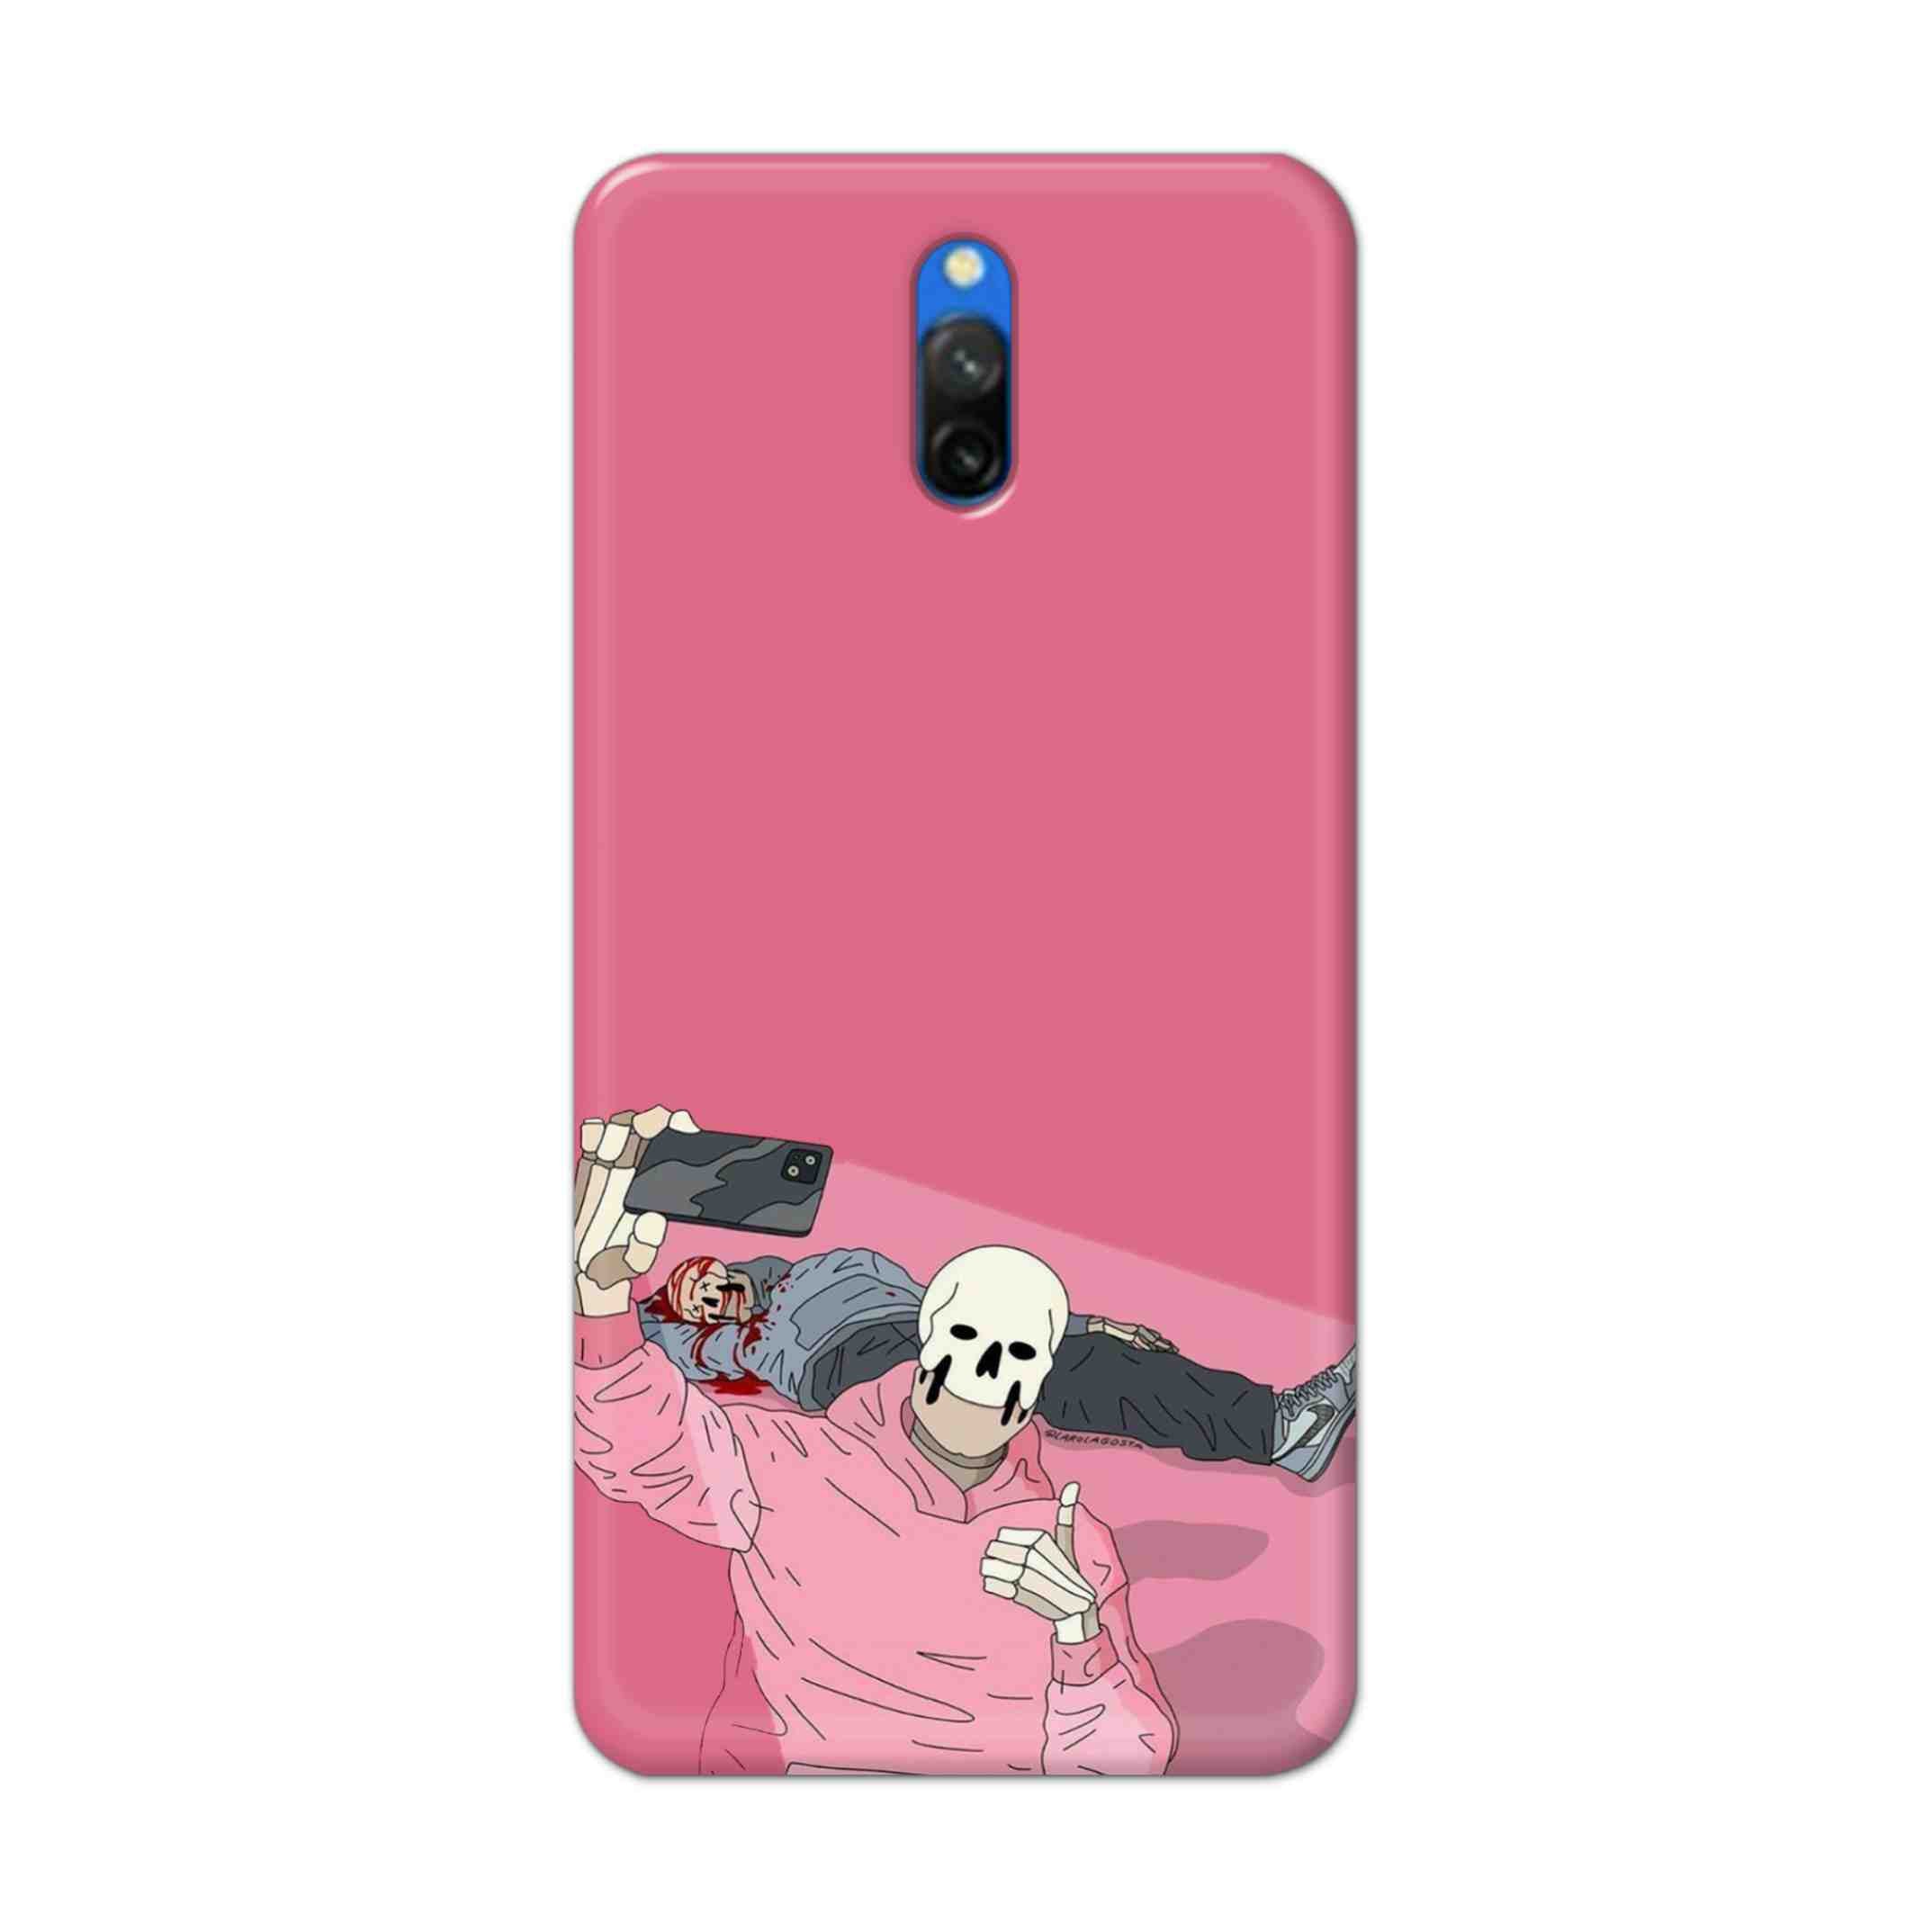 Buy Selfie Hard Back Mobile Phone Case/Cover For Redmi 8A Dual Online